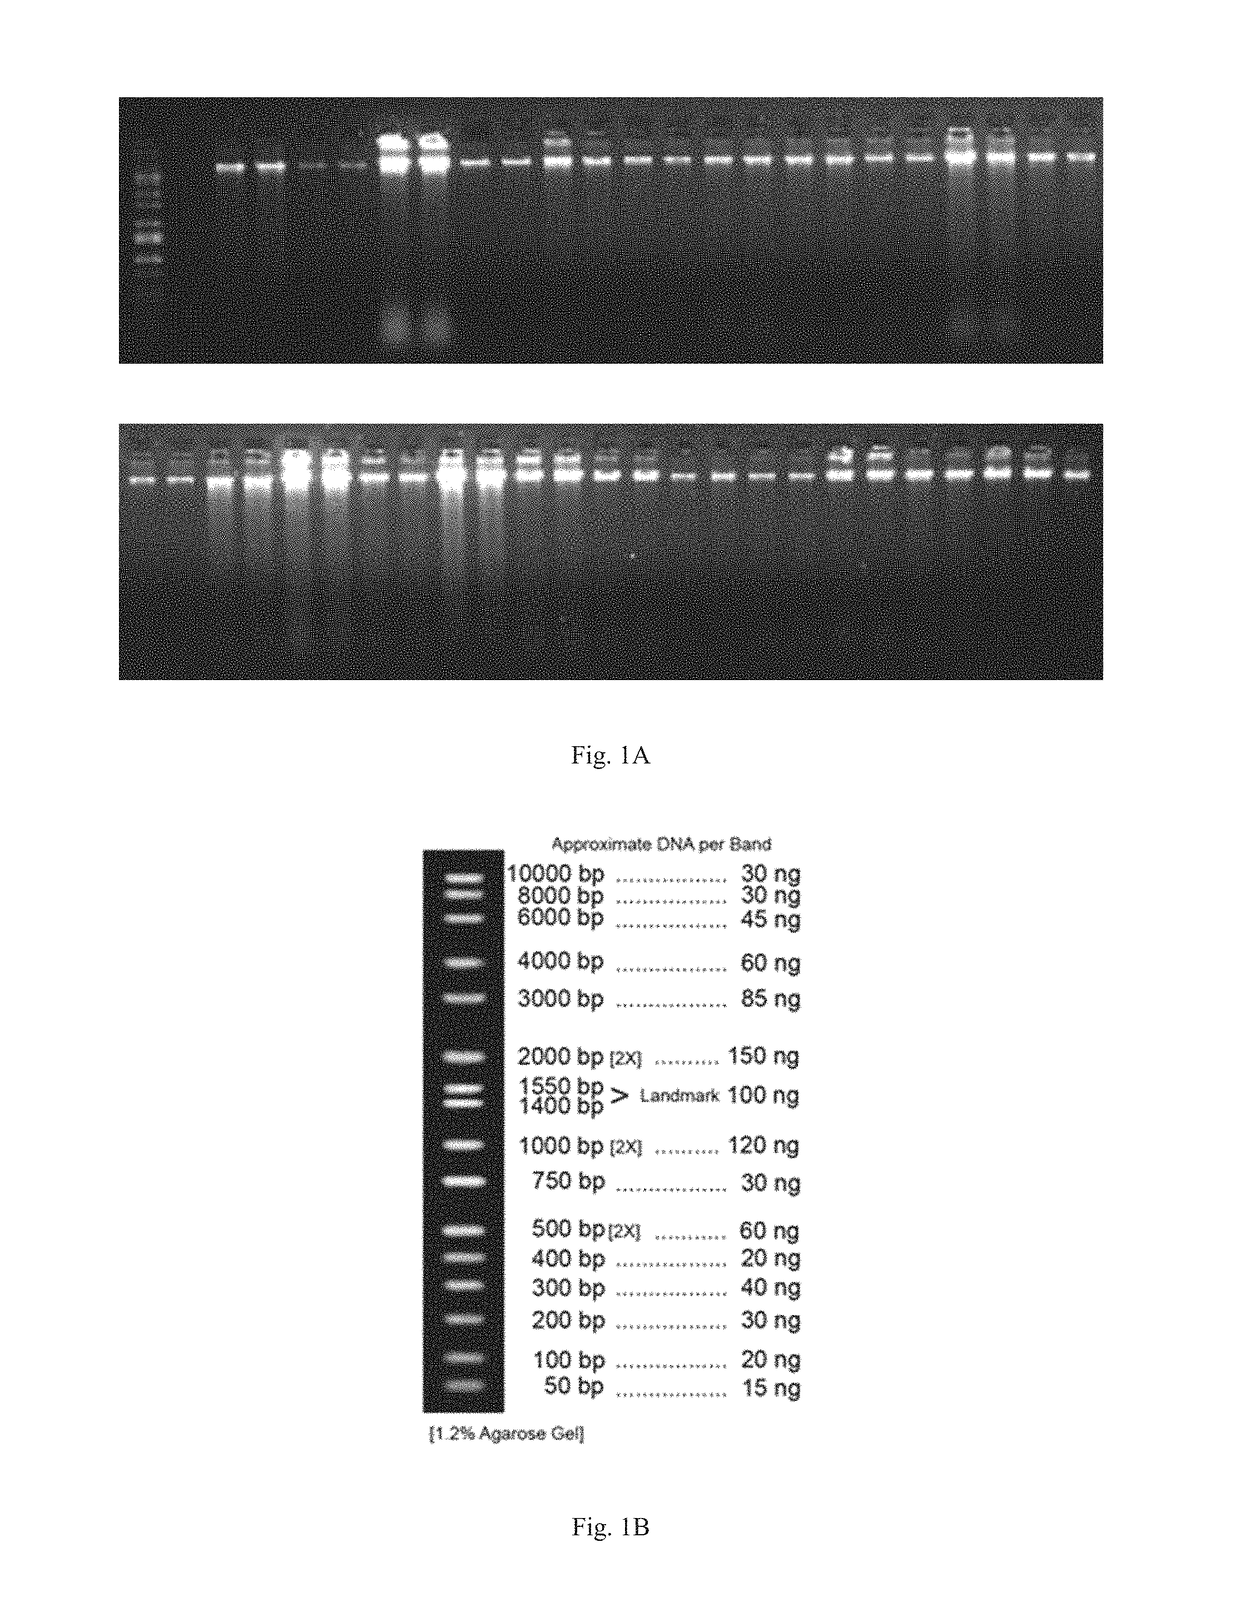 Nucleic acid preservation solution and methods of manufacture and use